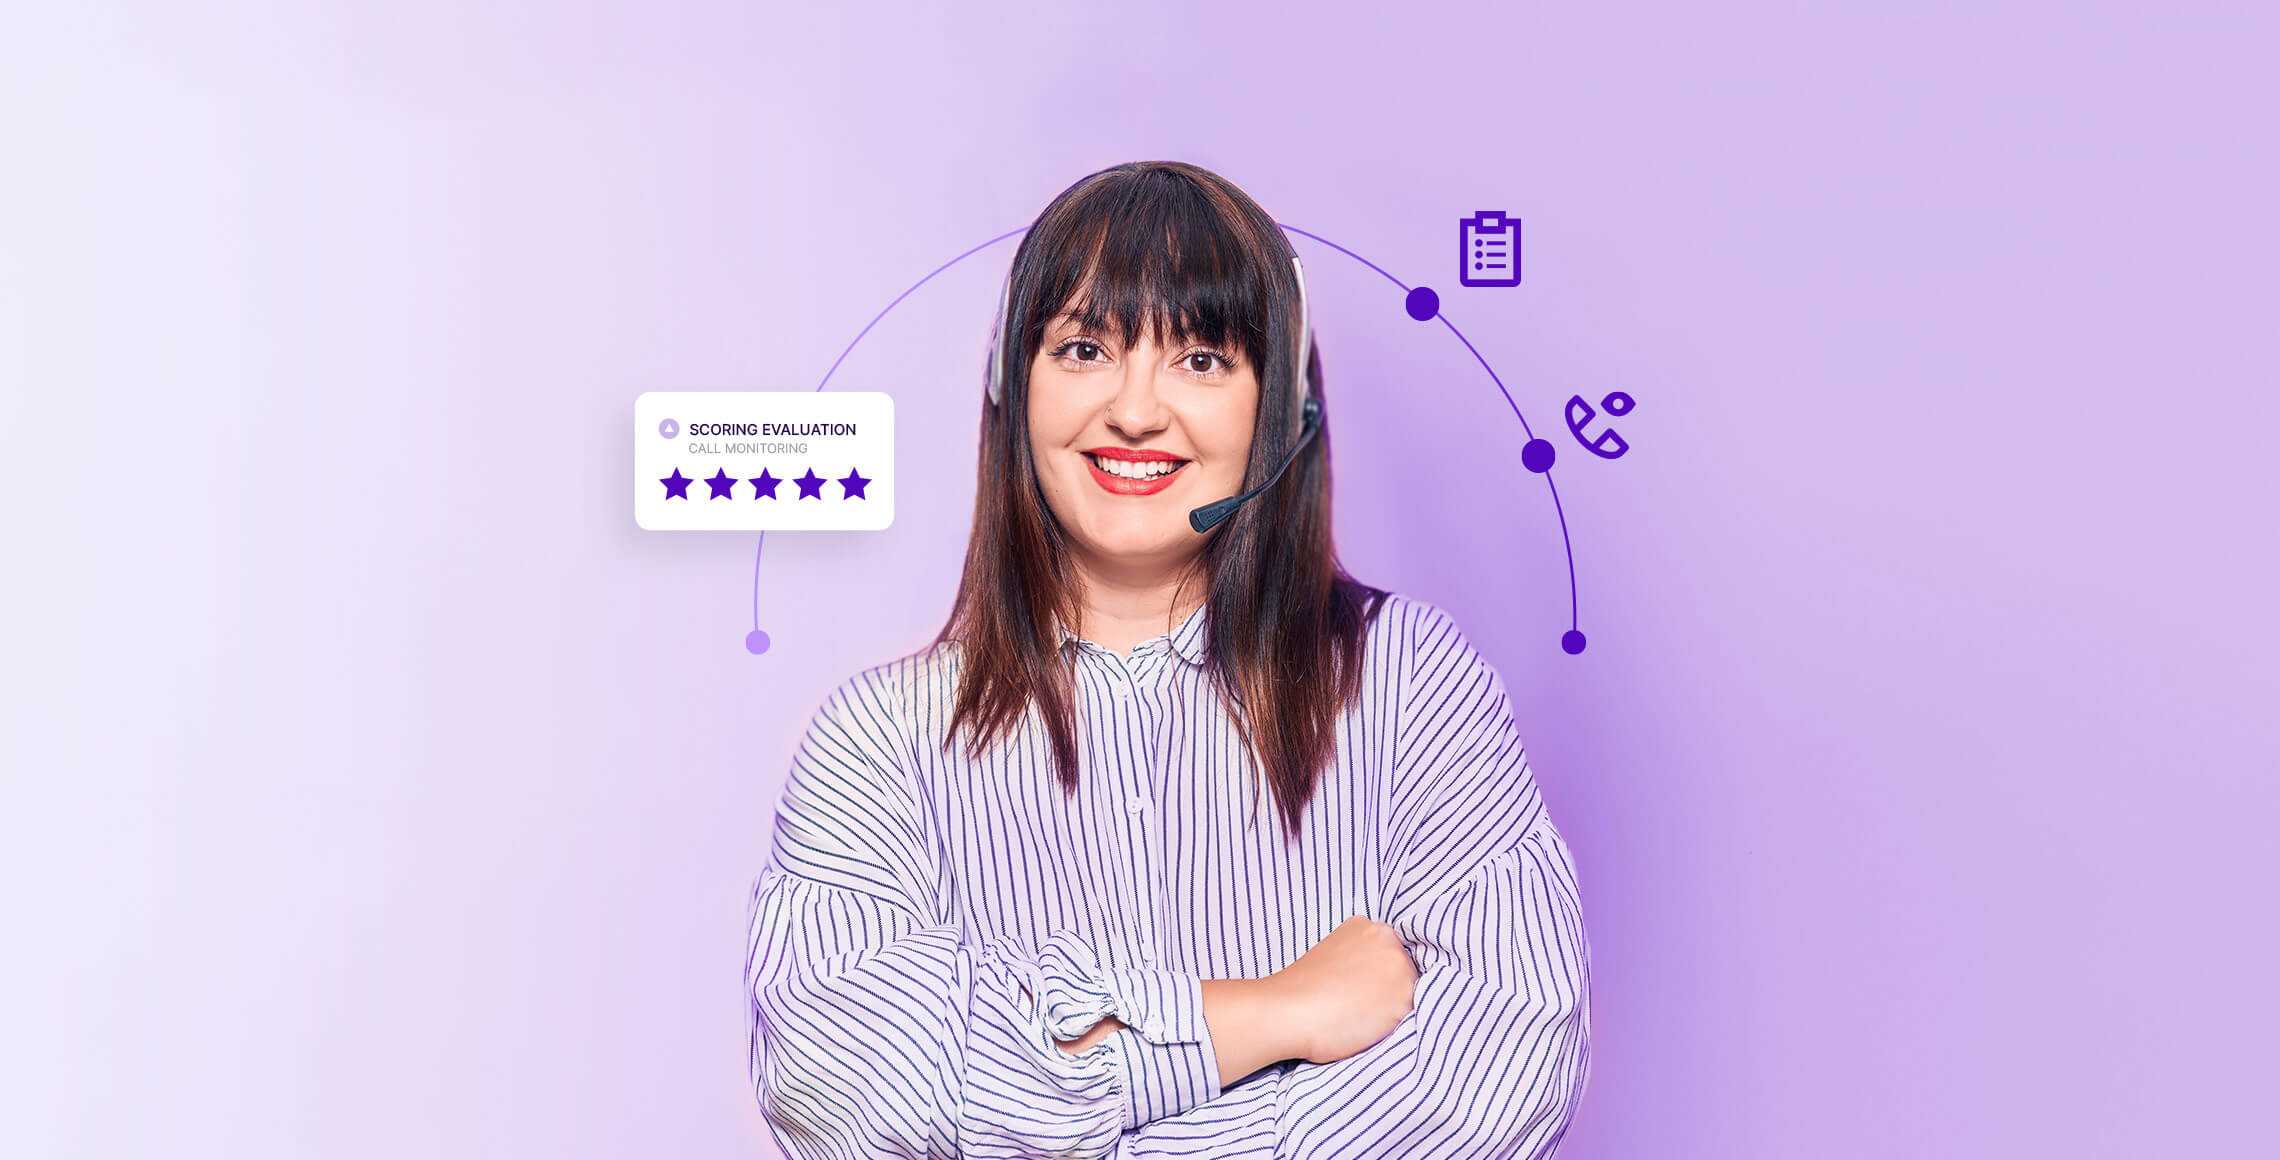 happy woman with headsets, a phone icon and a file icon connected to a call center scoring evaluation form